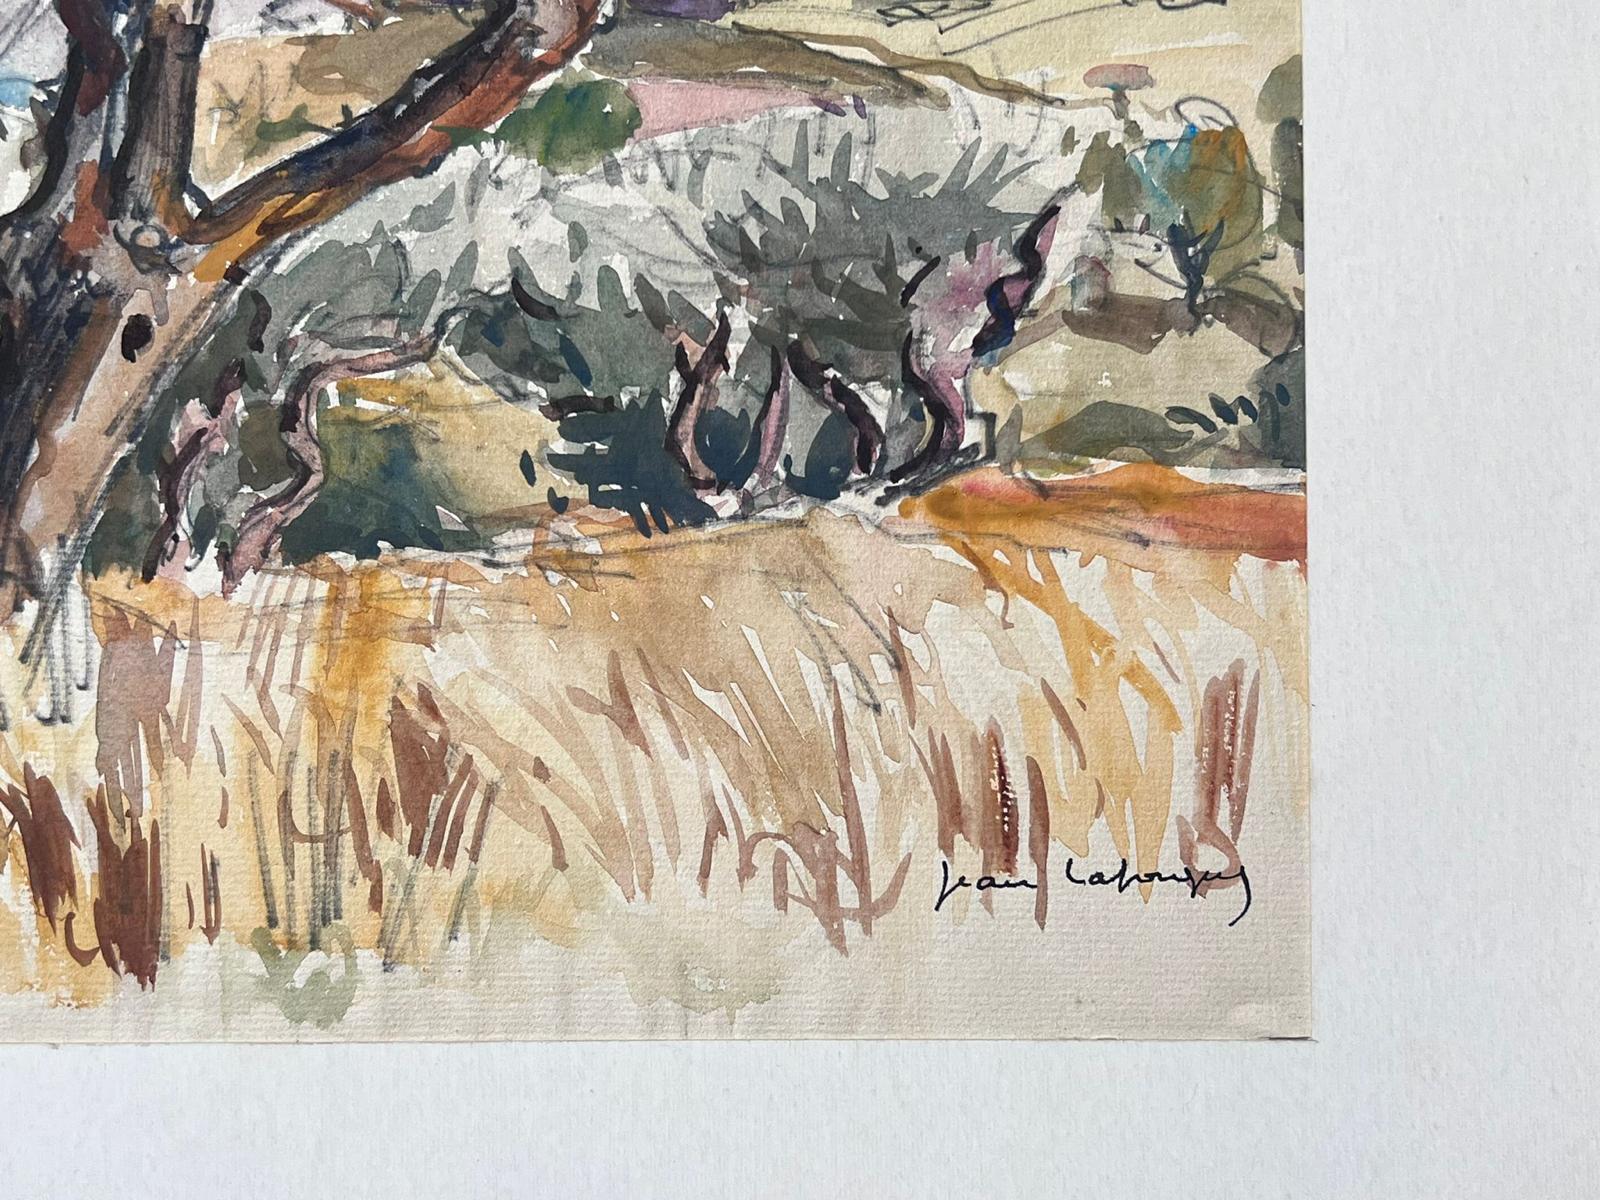 Provence 
Jean La Forgue (French 1901-1975) signed watercolour, mounted in a card frame
card frame: 12 x 15 inches
painting: 9 x 12 inches
provenance: the artists estate, France
condition: very good and sound condition; there are minor age related